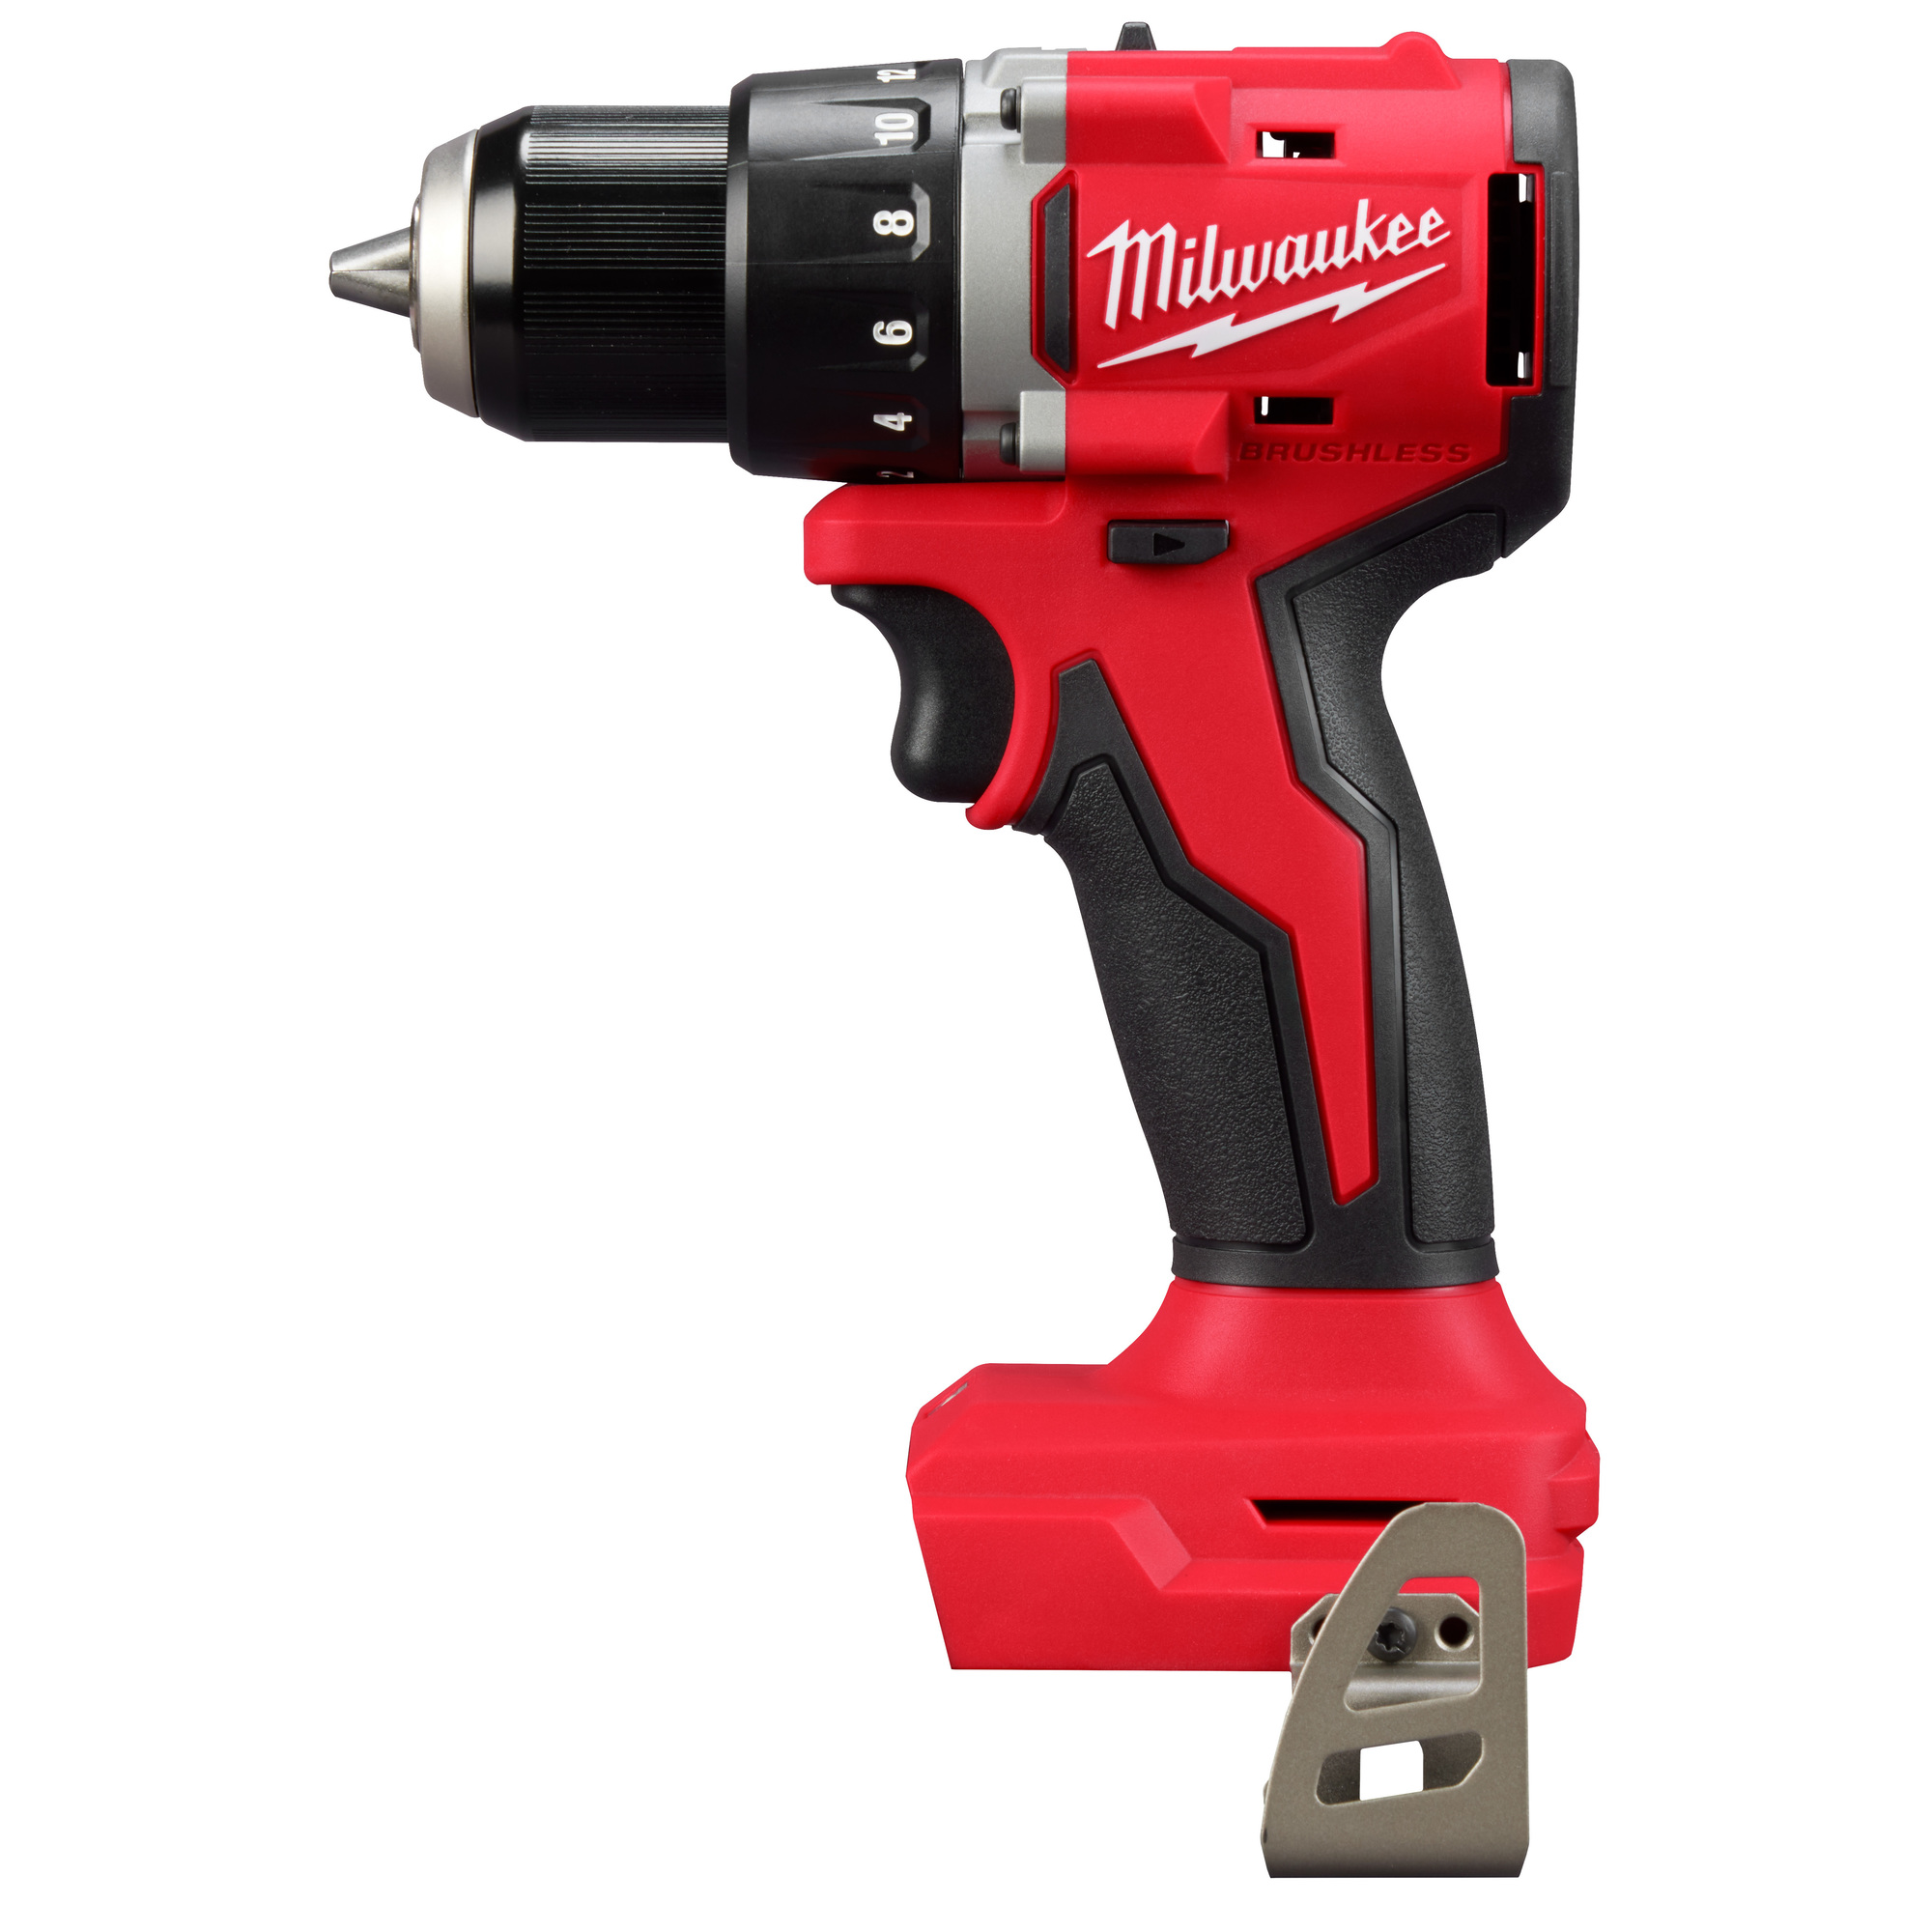 Milwaukee, M18 Compact Brushless 1/2Inch Drill/ Driver, Chuck Size 1/2 in, Max. Torque 550 ft-lbs., Max. Speed 1700 rpm, Model 3601-20